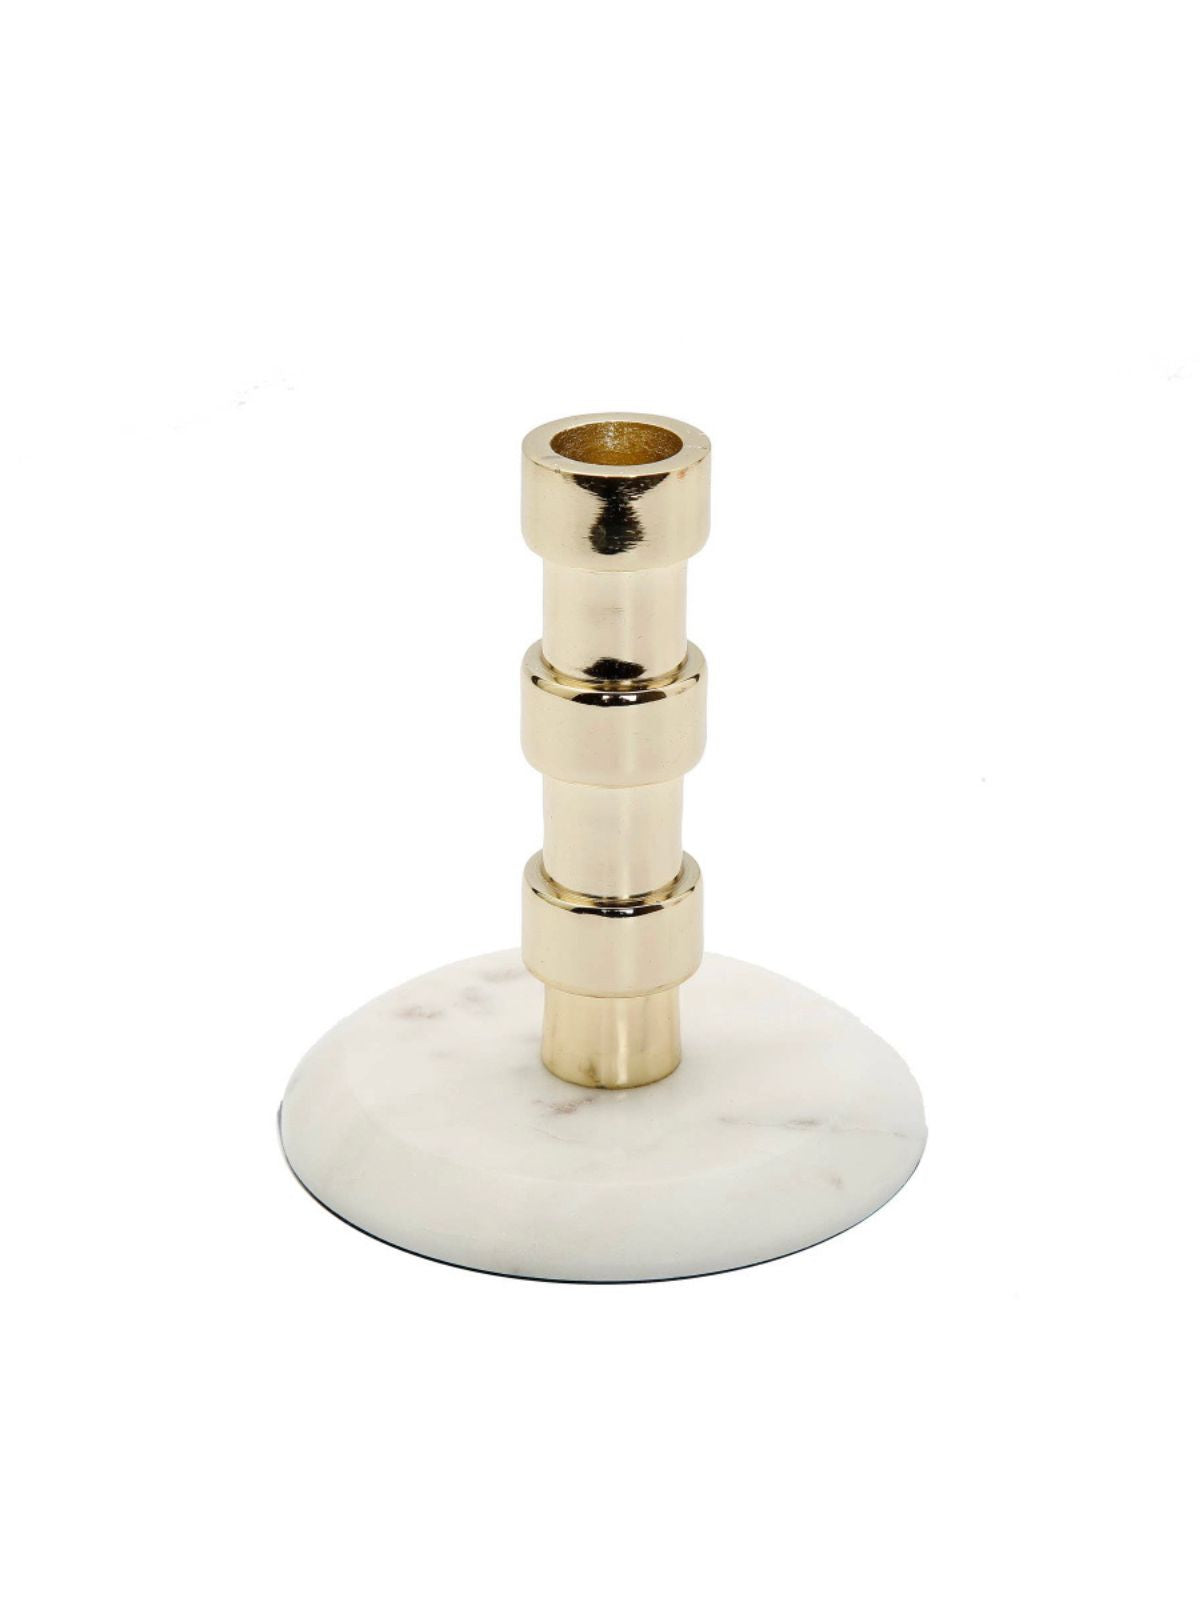 Gold Taper Candle Holder on Marble Base, Measures 8.5H.